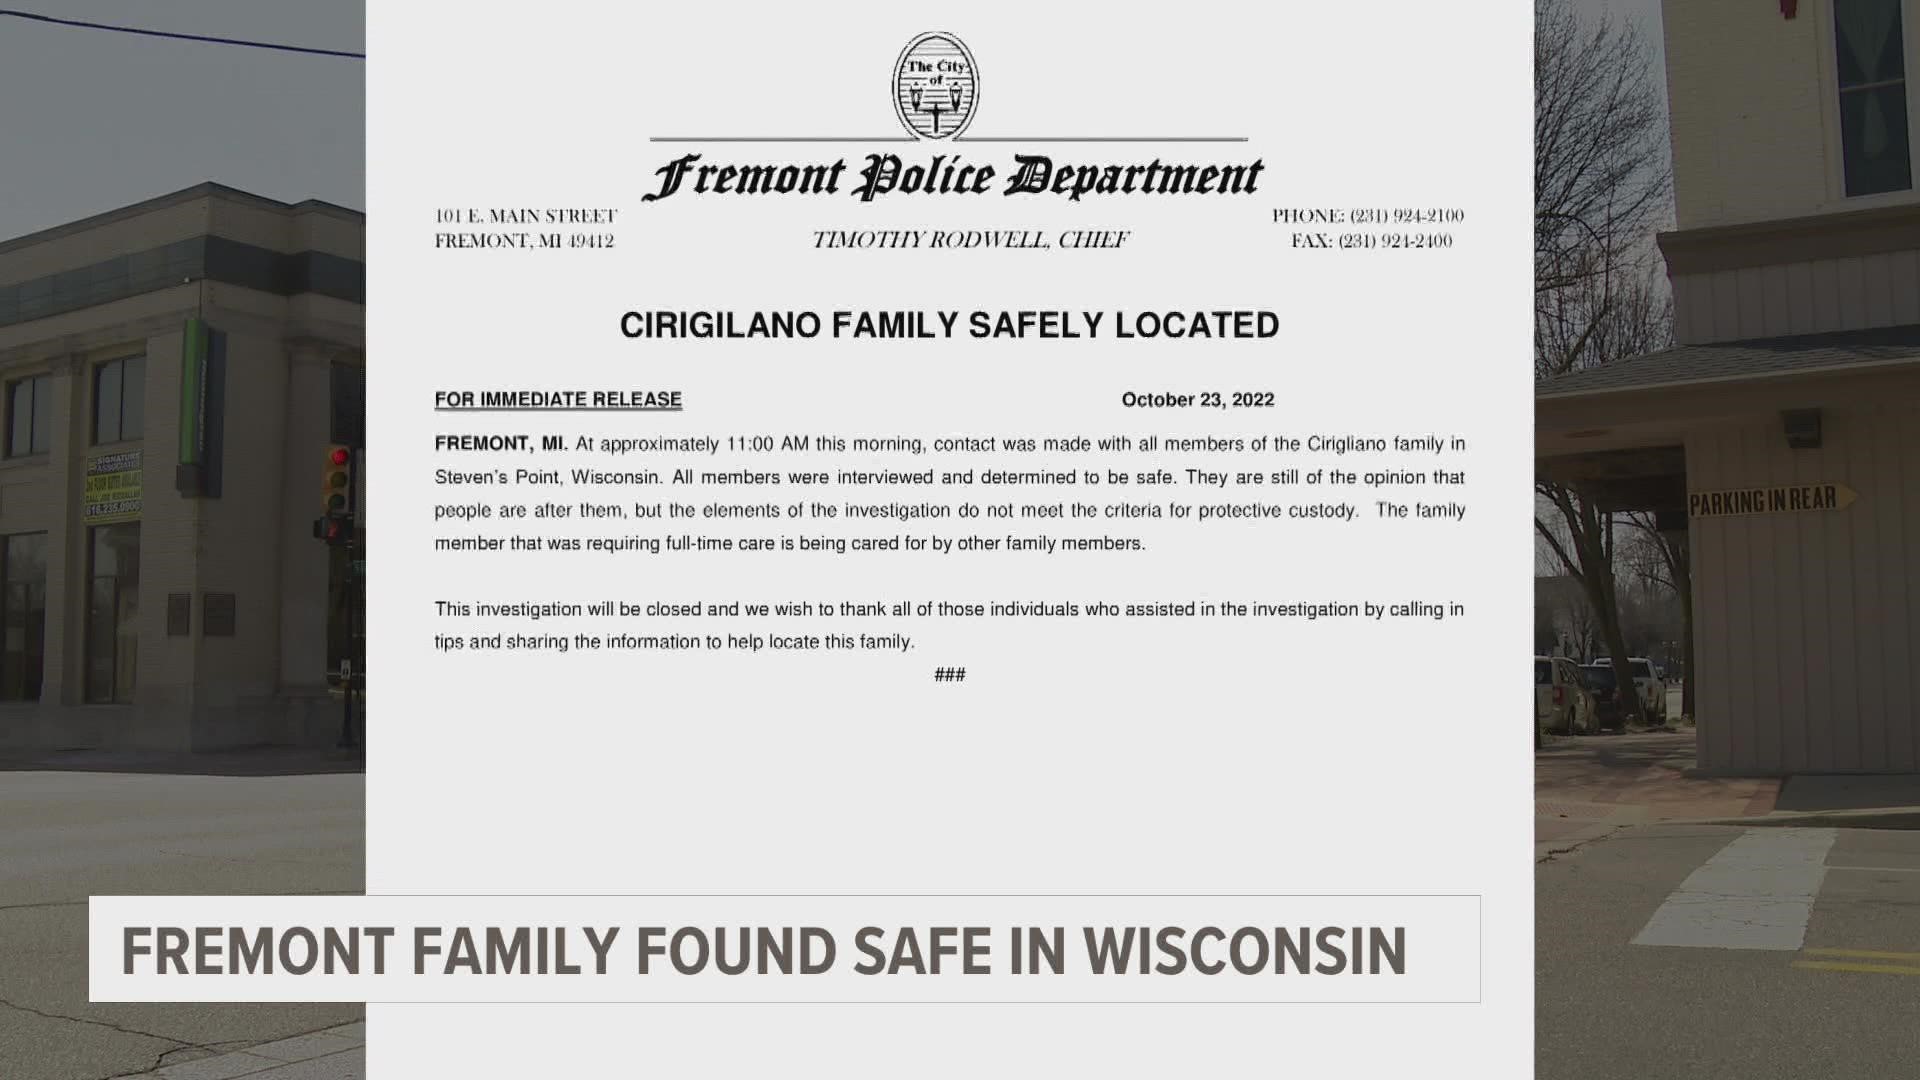 The Cirigliano family still believes people are 'after them,' but their situation does not meet criteria for protective custody, the Fremont Police Department said.